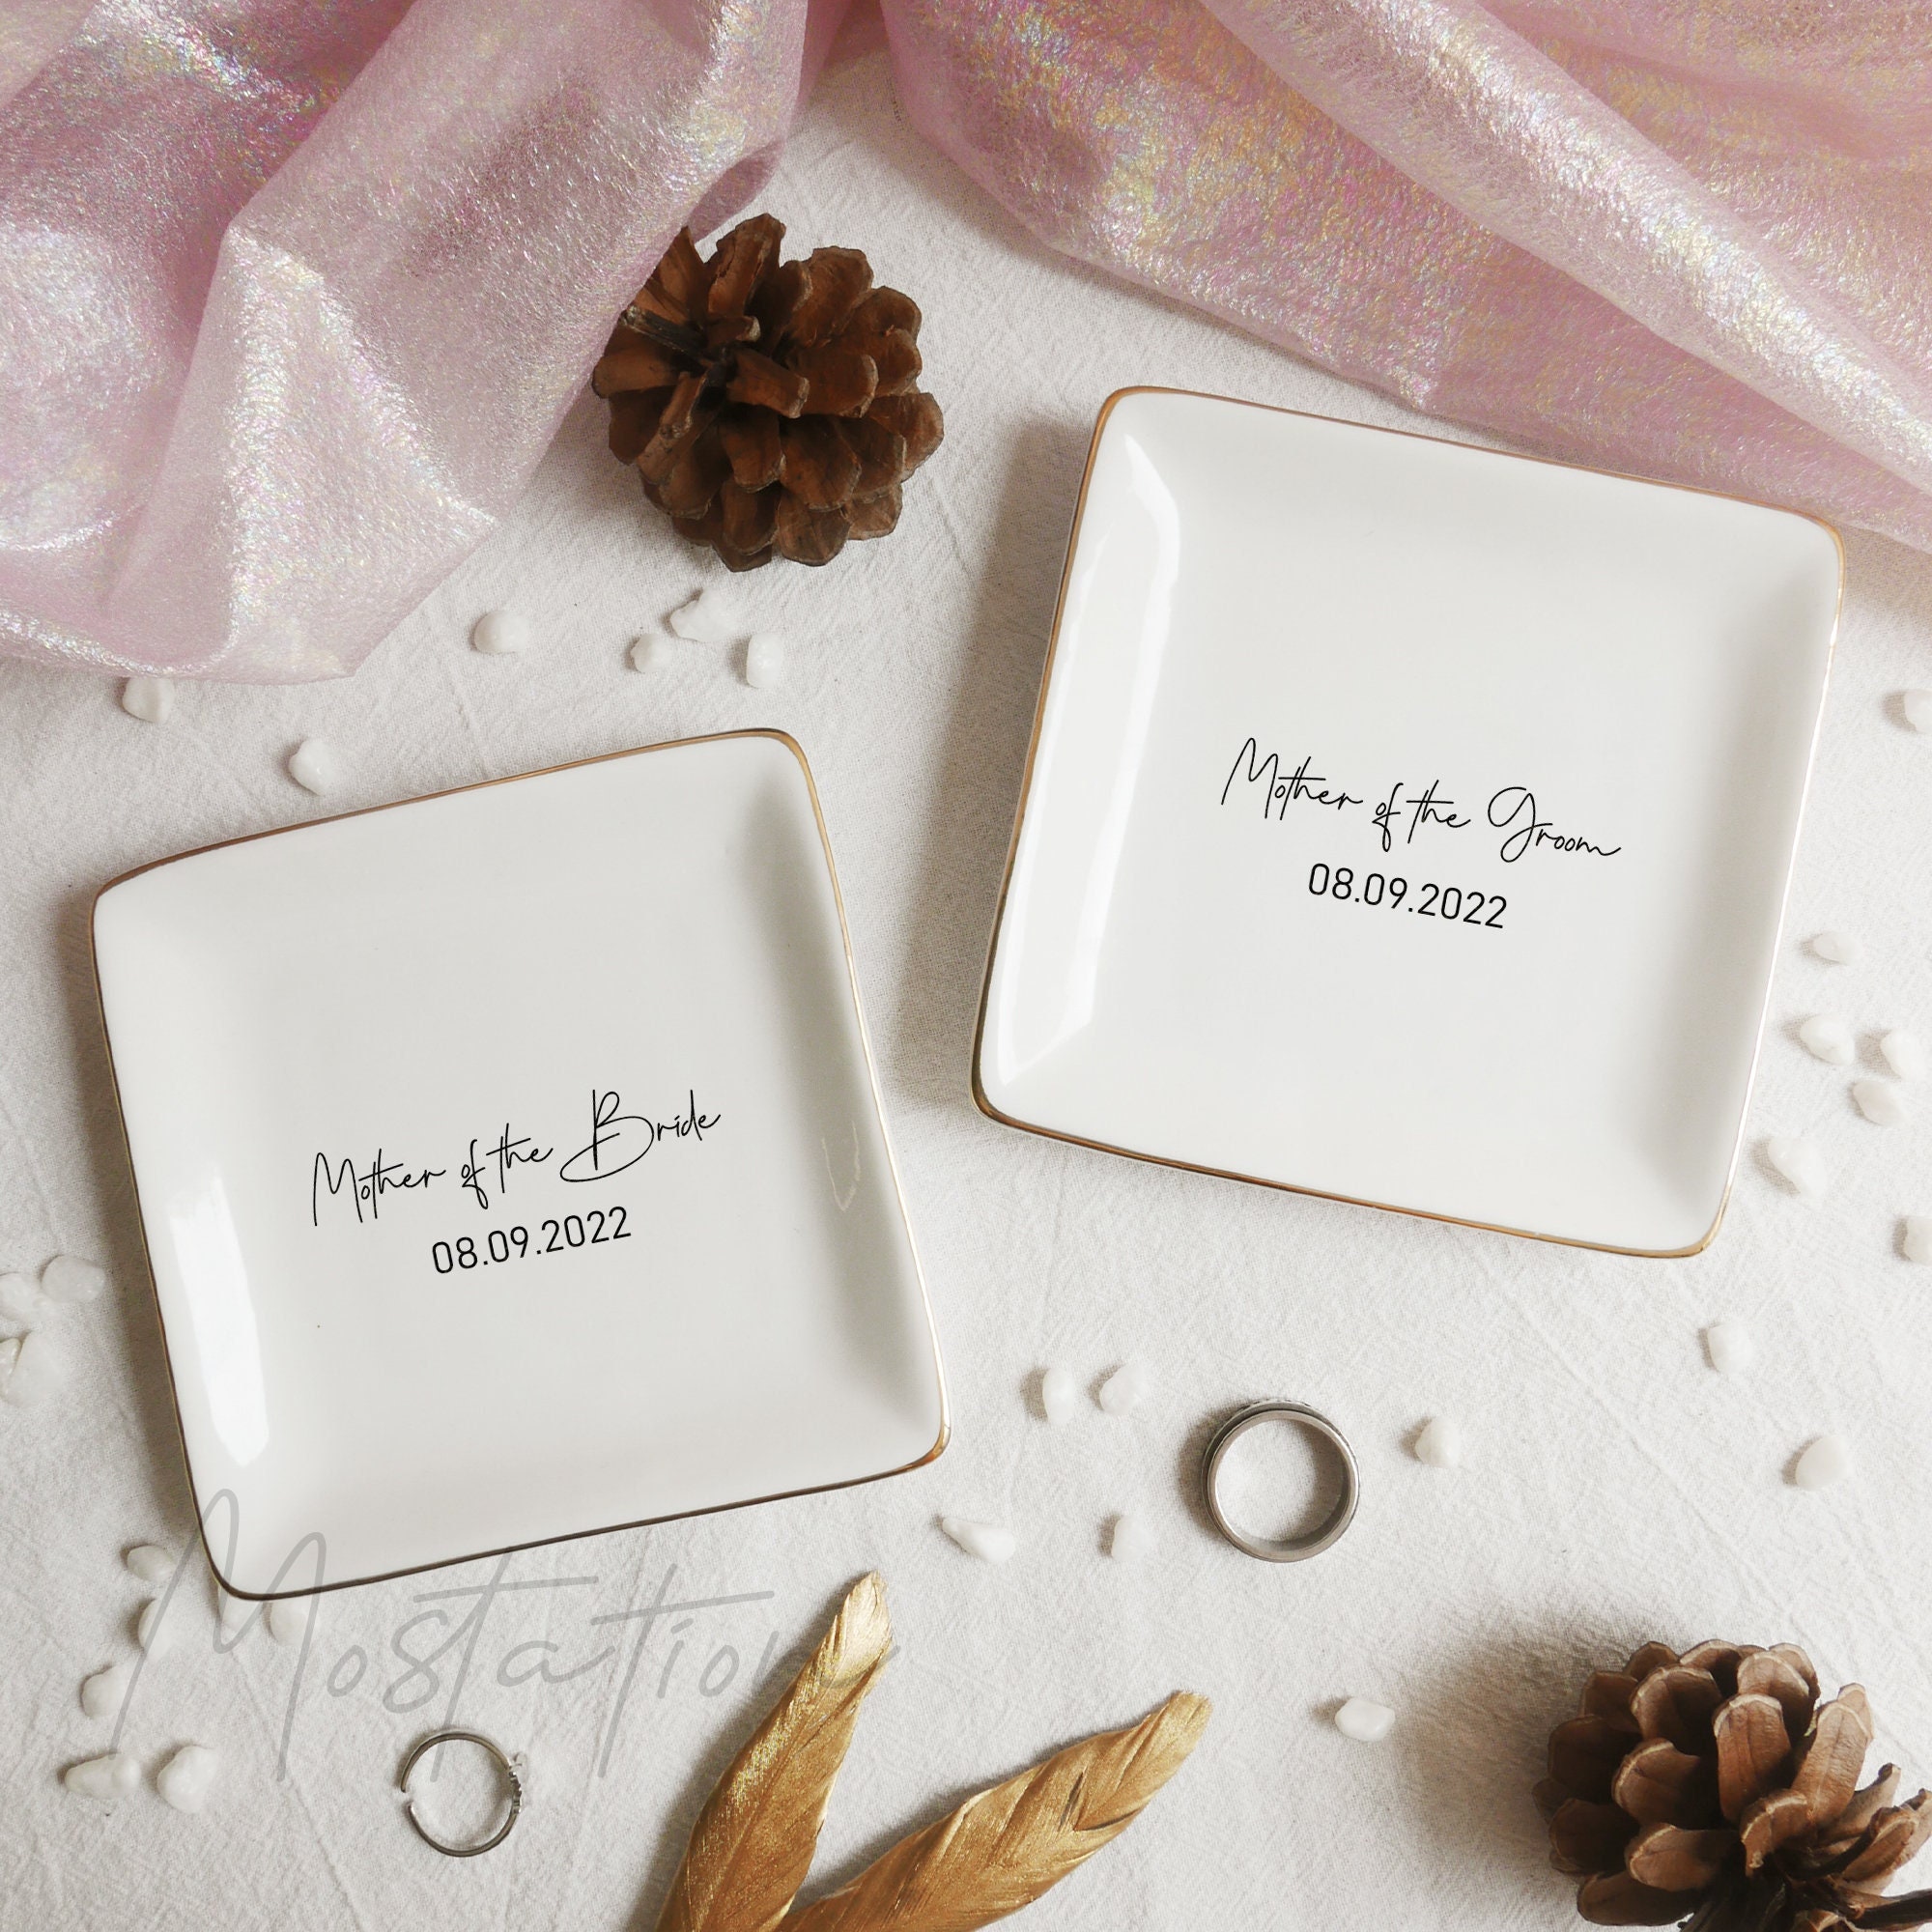 AREOK Best Gifts for Mom, Funny Mom Gifts from Daughters Son - Birthday  Gifts for Mom, Mom Christmas Gift, Jewelry Tray, Ceramic Ring Dish Holder